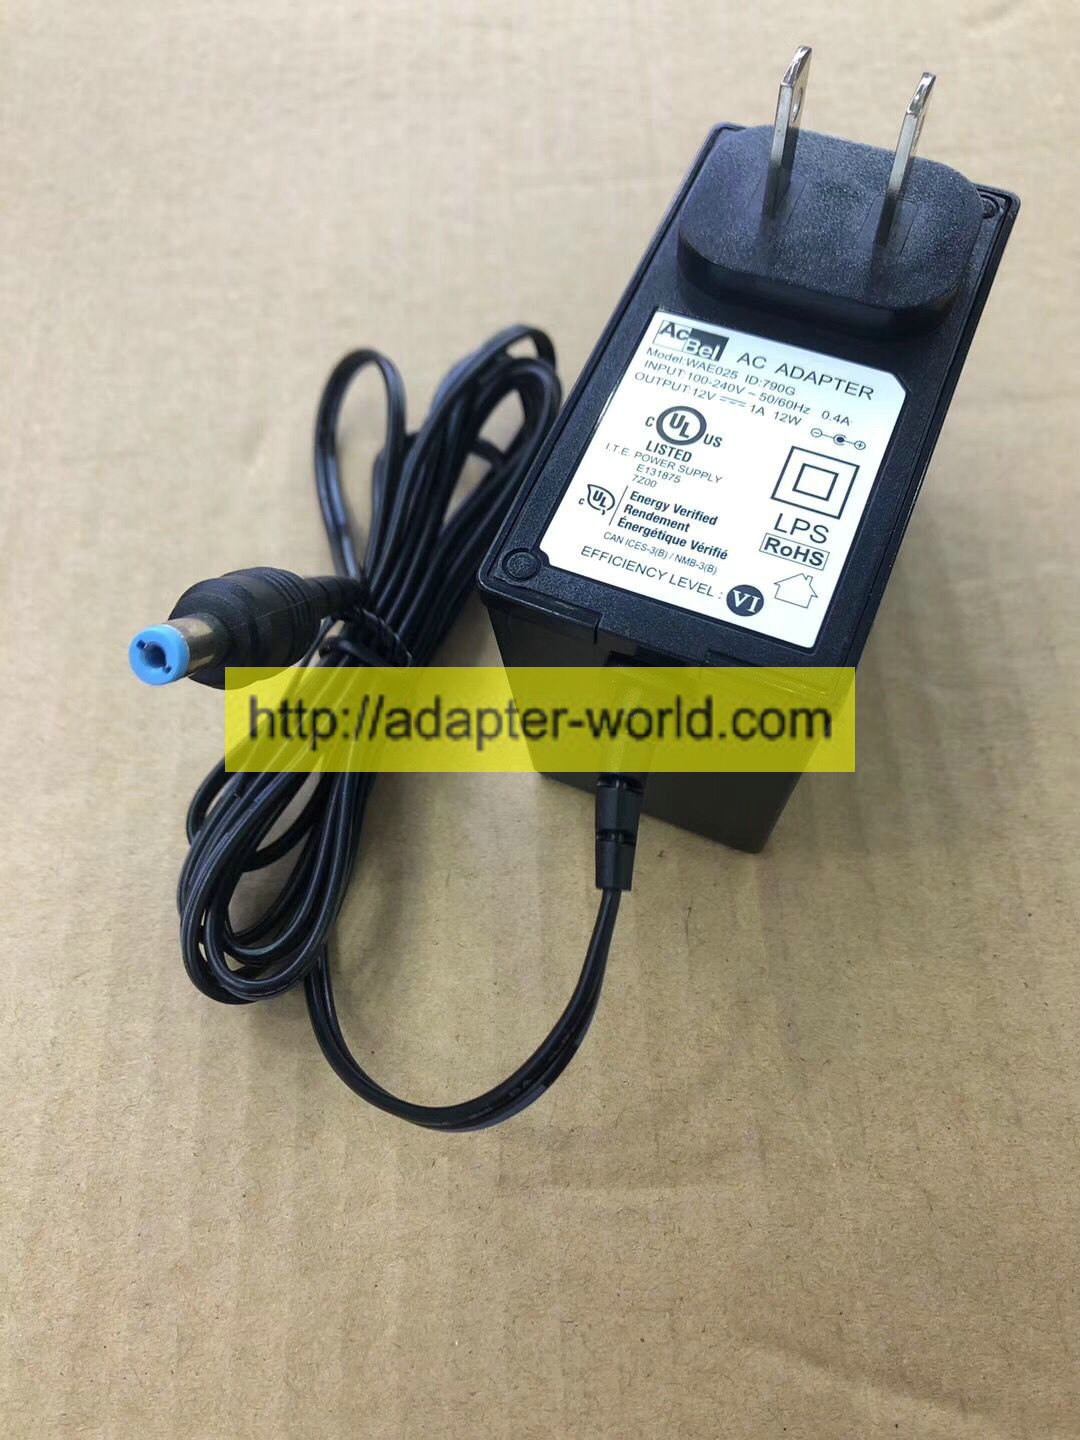 *100% Brand NEW* ACBel 12V --1A 12W MODEL:WAE025 ID:790G Switching AC Power Adapter Free shipping!